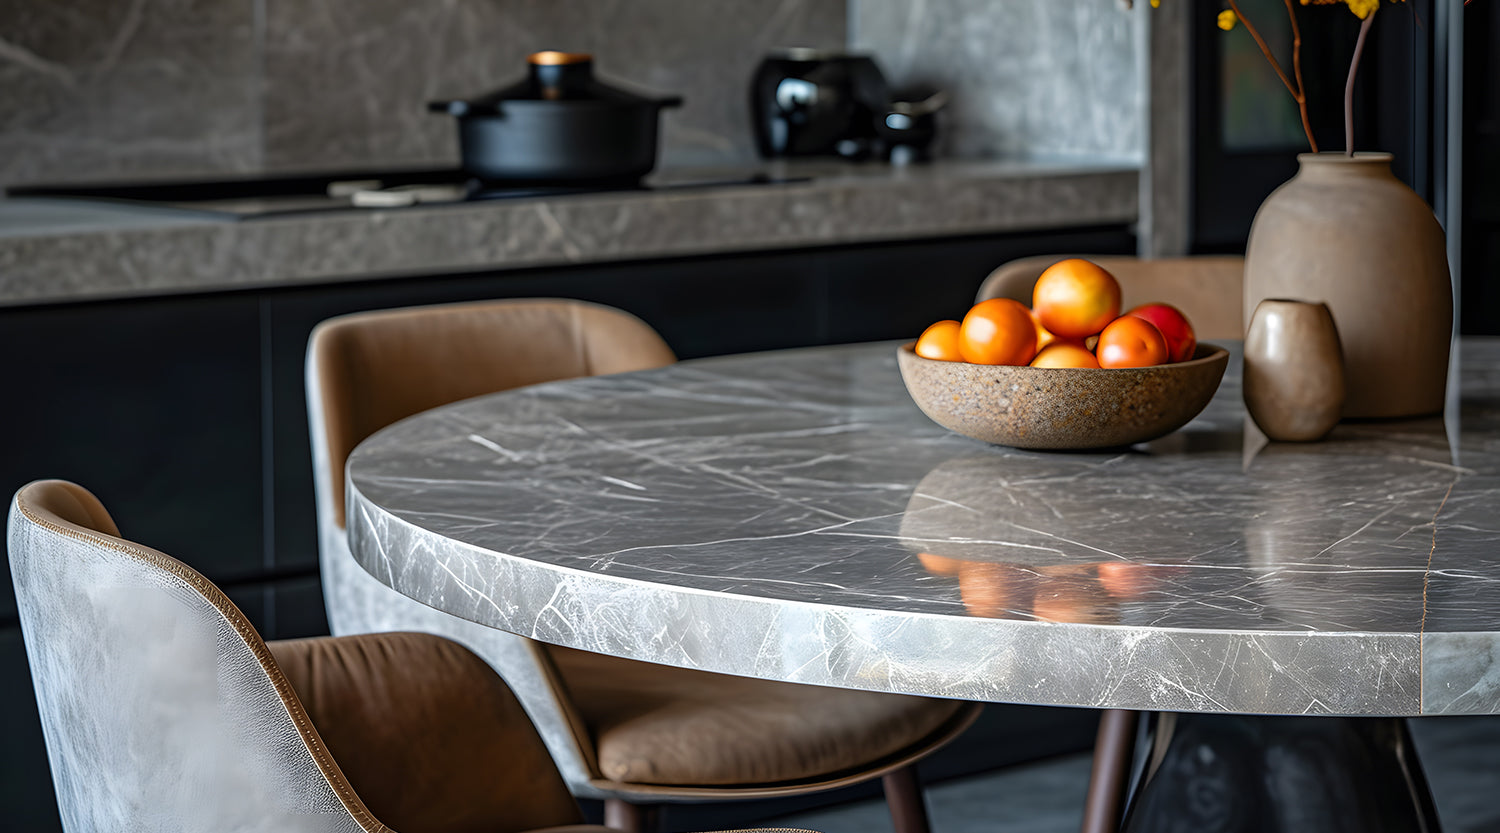 Check Out Gorgeous Marble Dining Table Design Ideas for Your Home!